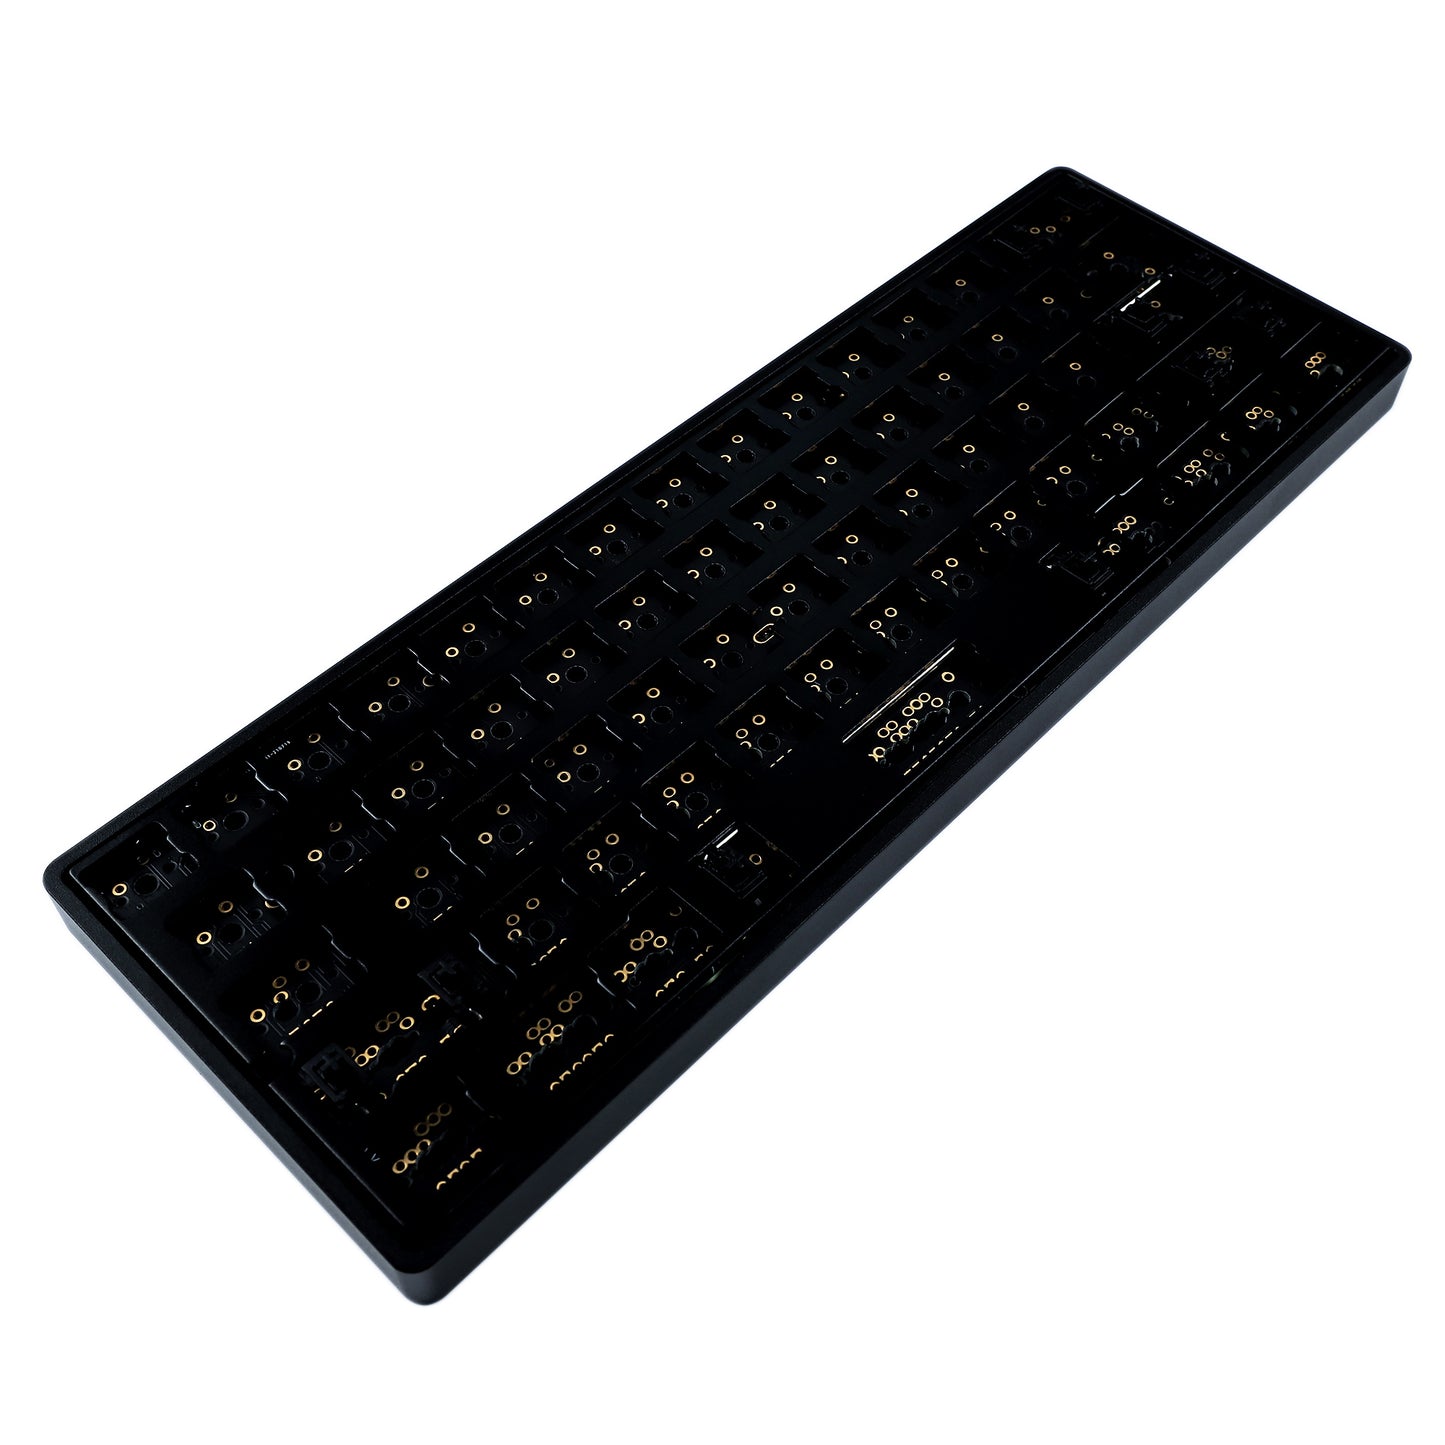 YMD-60% GH60 Light Aluminum Case Kit(QMK Soldering Supported/ANSI ISO Multi-Layout Supported)